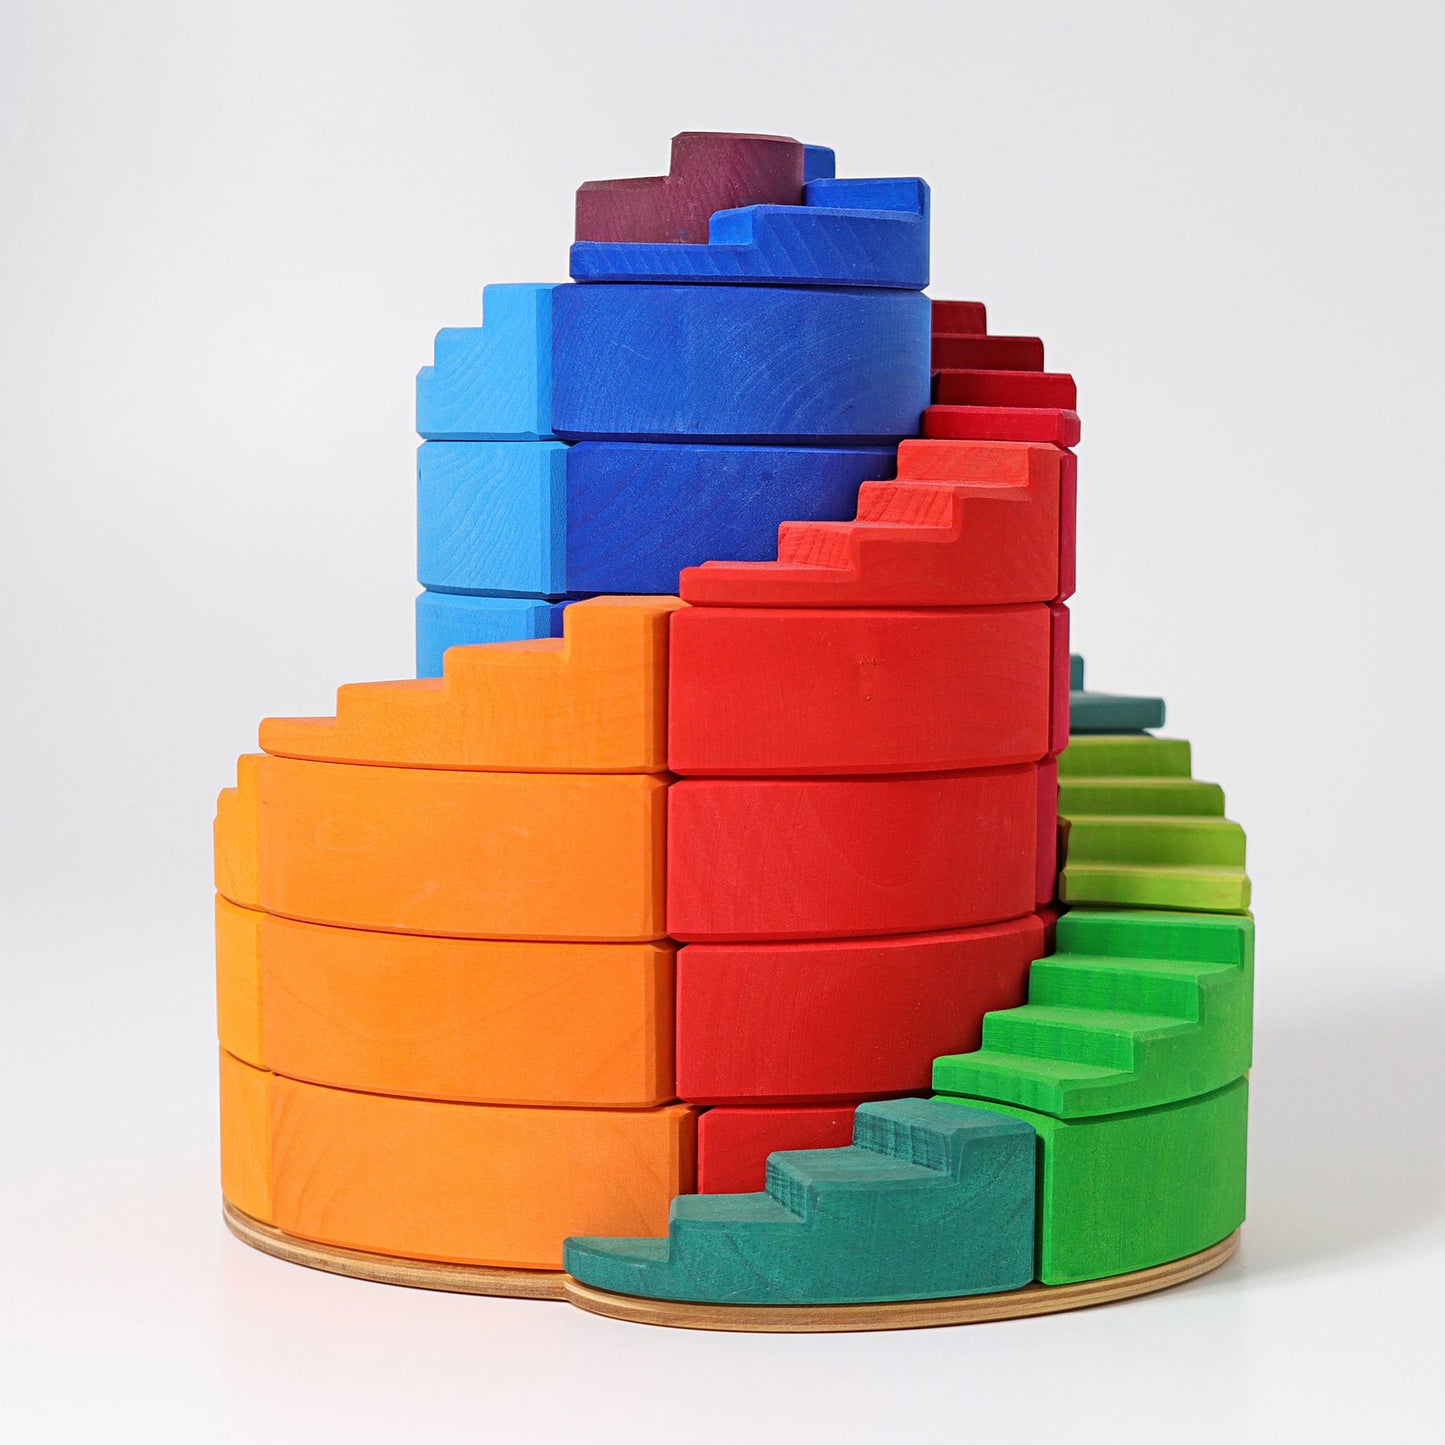 Grimm's Wooden Counter-Rotating Stepped Rainbow Spiral